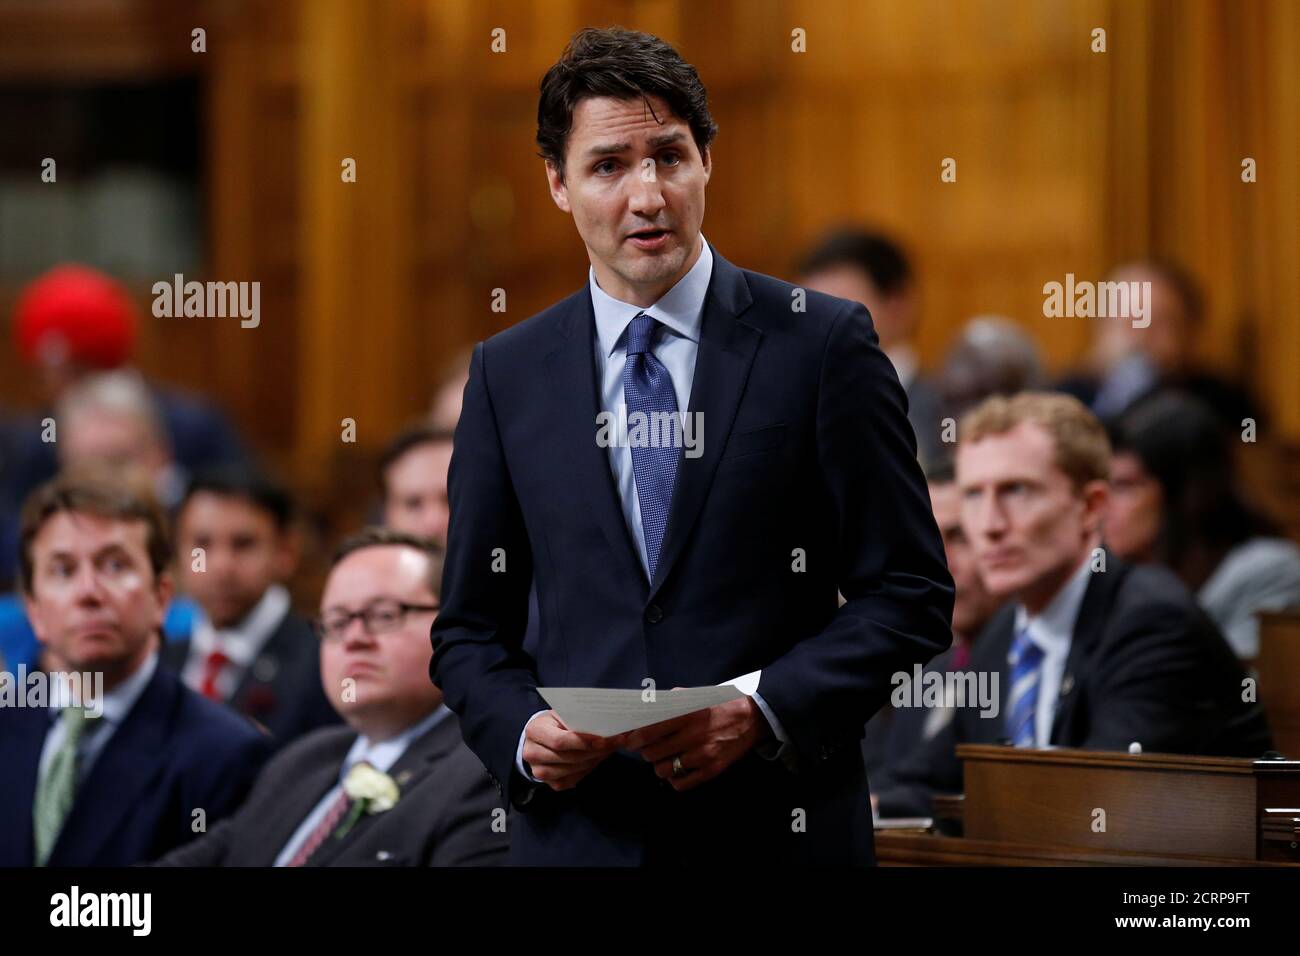 Canada's Prime Minister Justin Trudeau delivers an apology in the House of Commons on Parliament Hill in Ottawa, Ontario, Canada, May 19, 2016 following a physical altercation the previous day. REUTERS/Chris Wattie Stock Photo